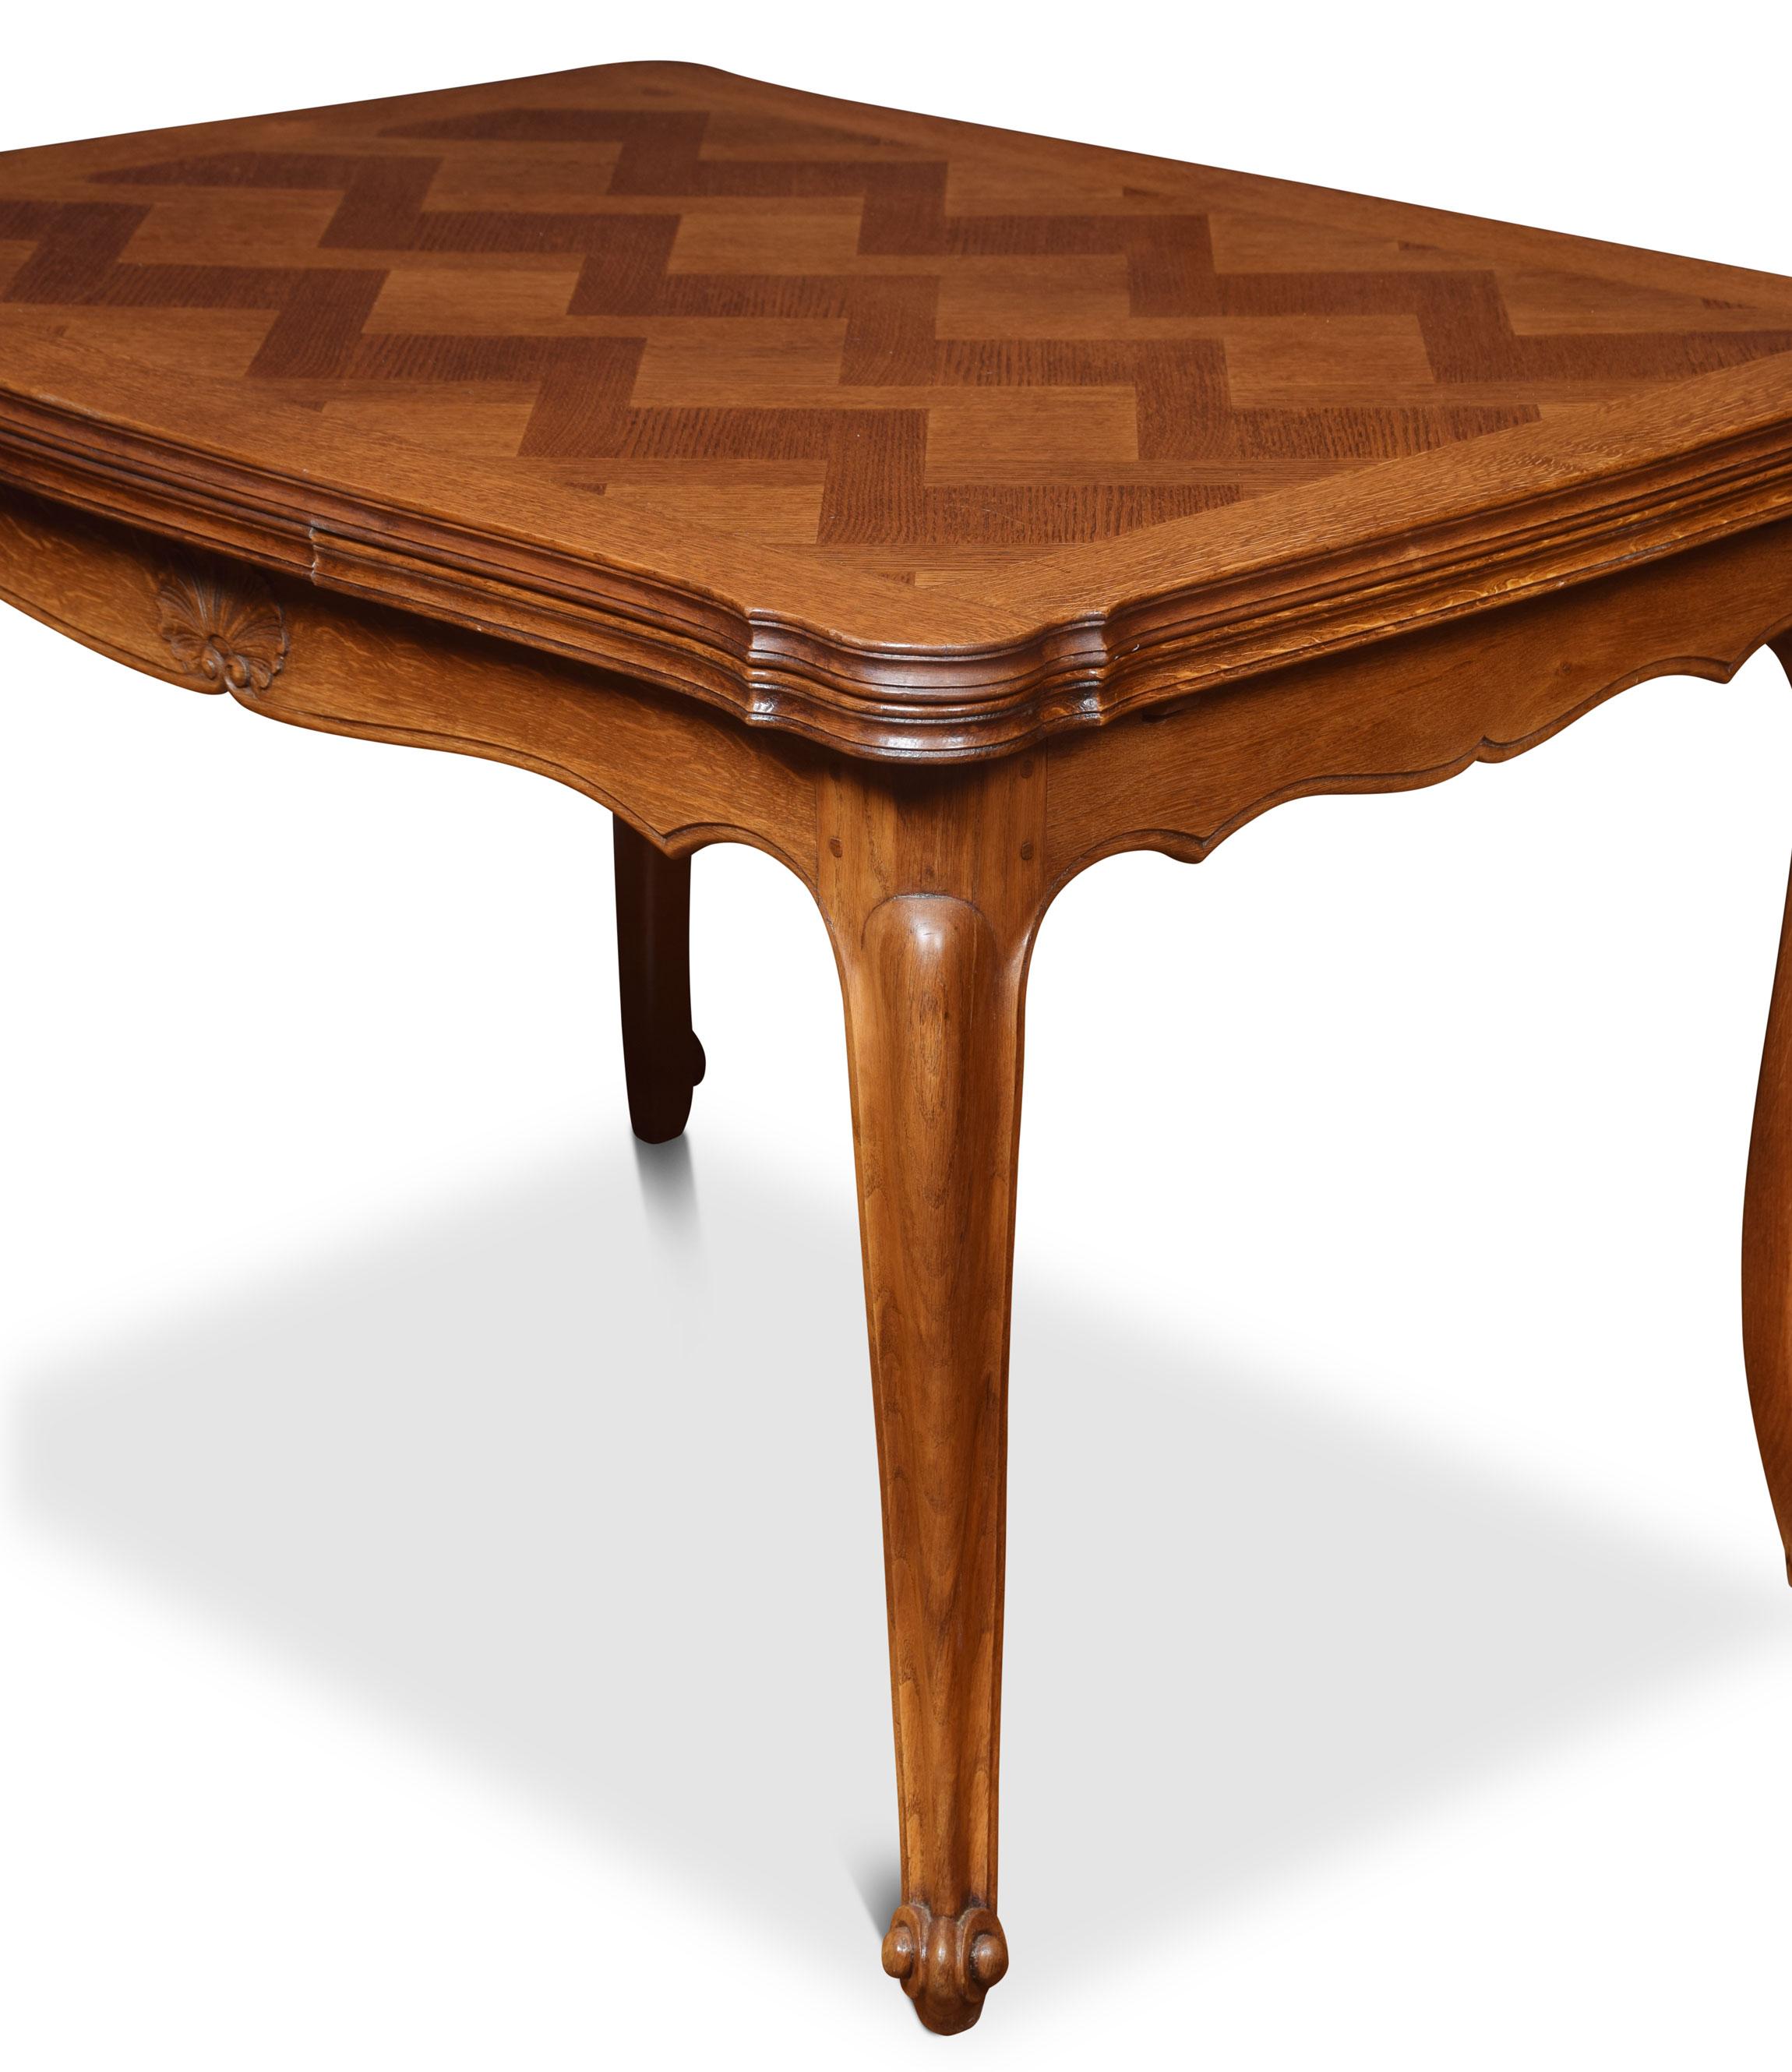 French Provincial style draw leaf dining table, the serpentine oak parquet top with two pull out leaves above the shaped carved apron. All raised up on cabriole legs terminating on upswept feet.
Dimensions:
Height 30 inches
Width 47 inches when open